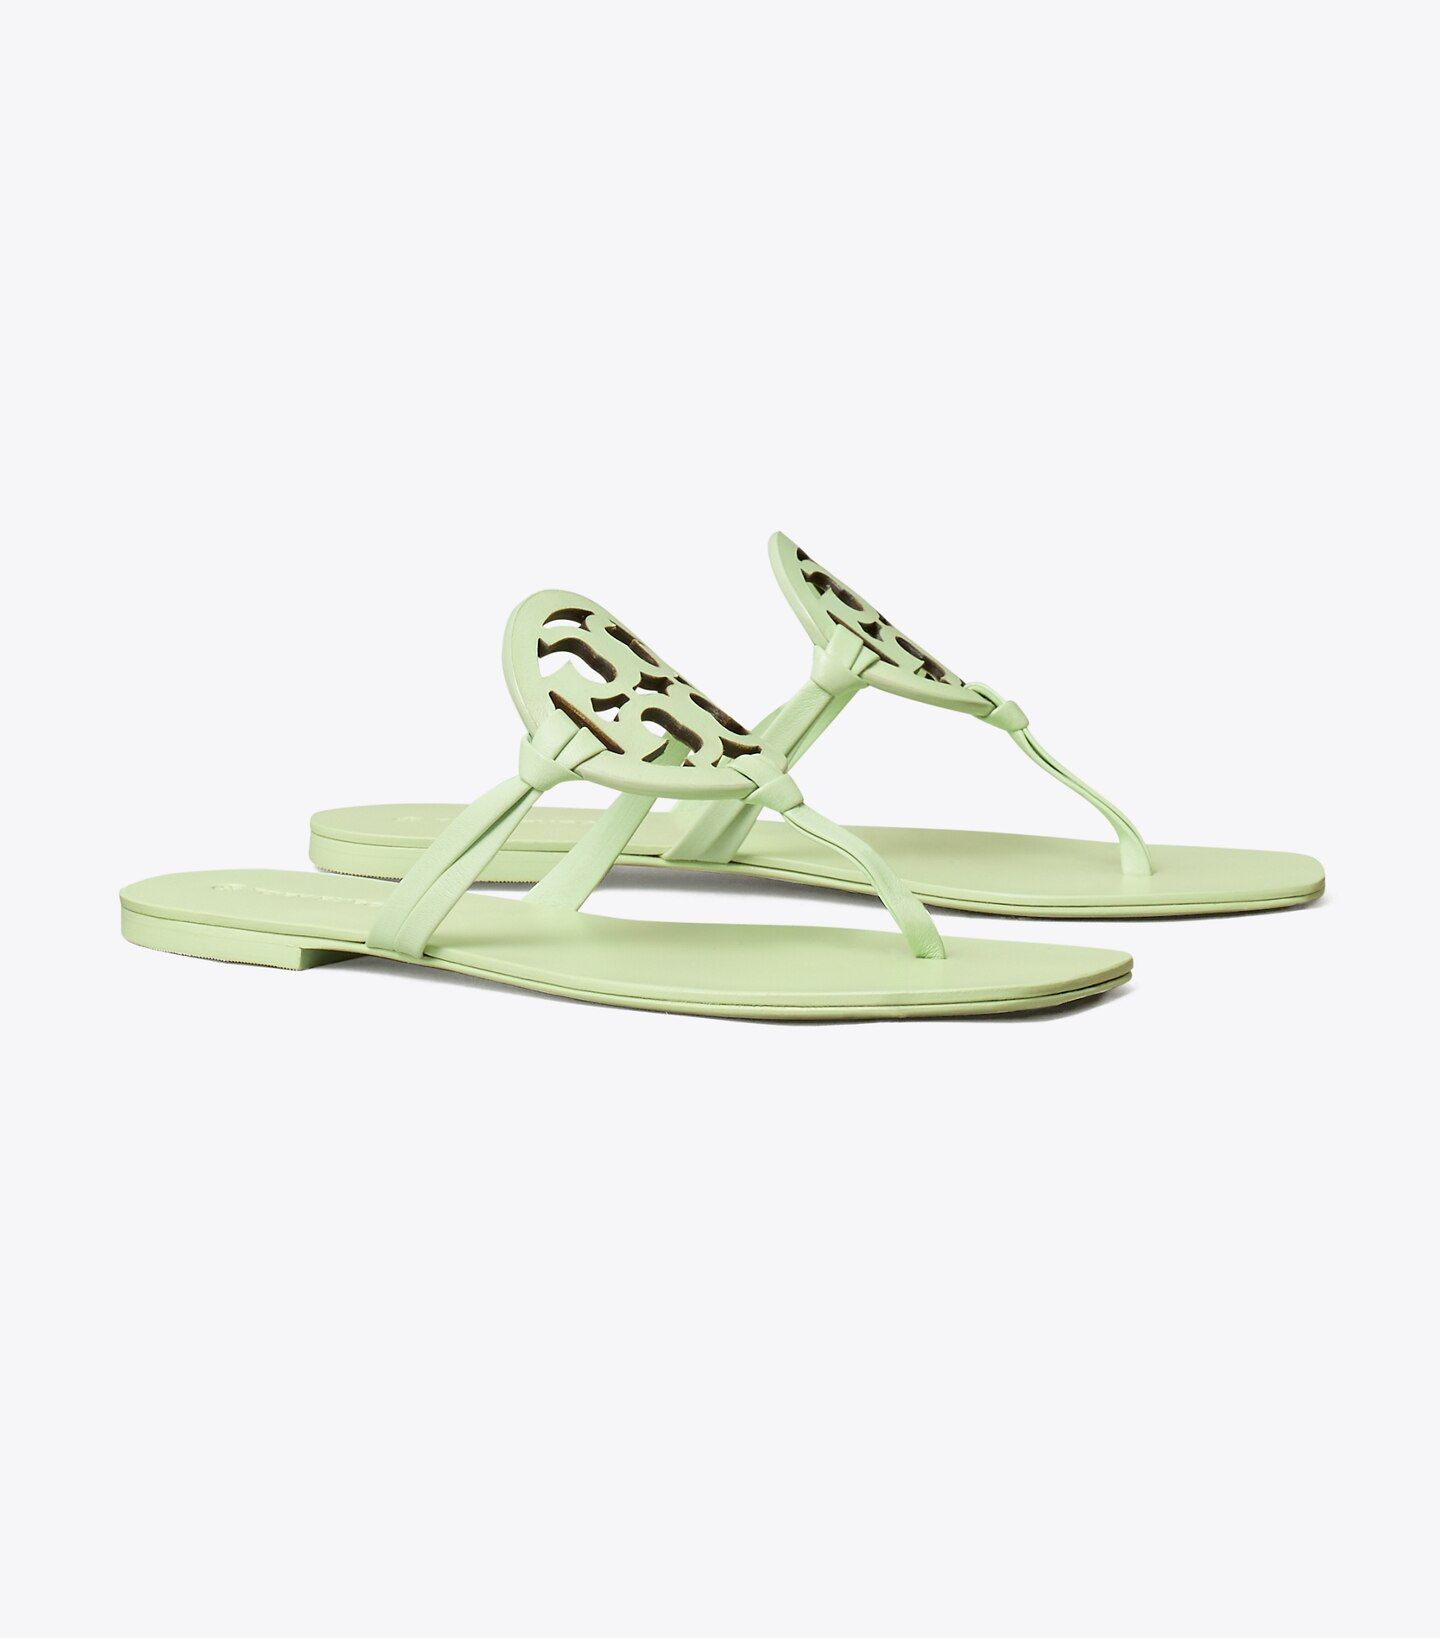 Miller Square-Toe Sandal, Leather | Tory Burch (US)